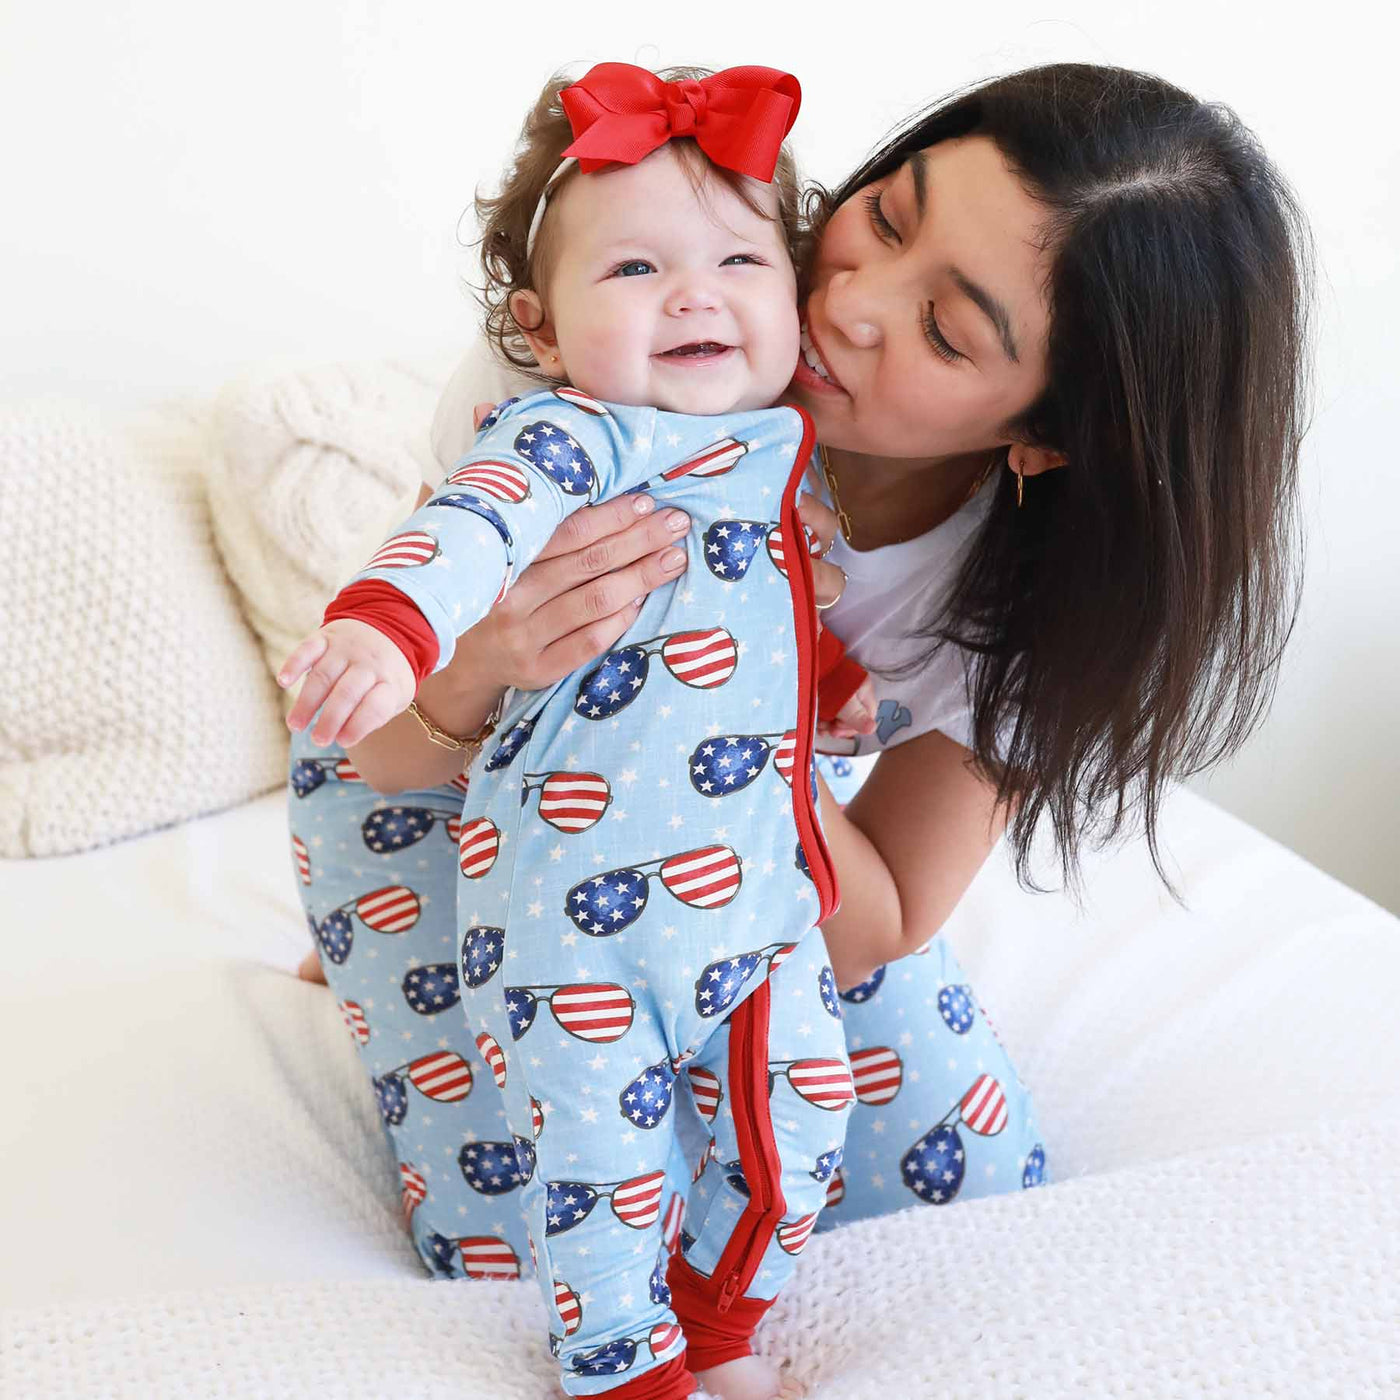 pajama romper for babies with flag sunglasses